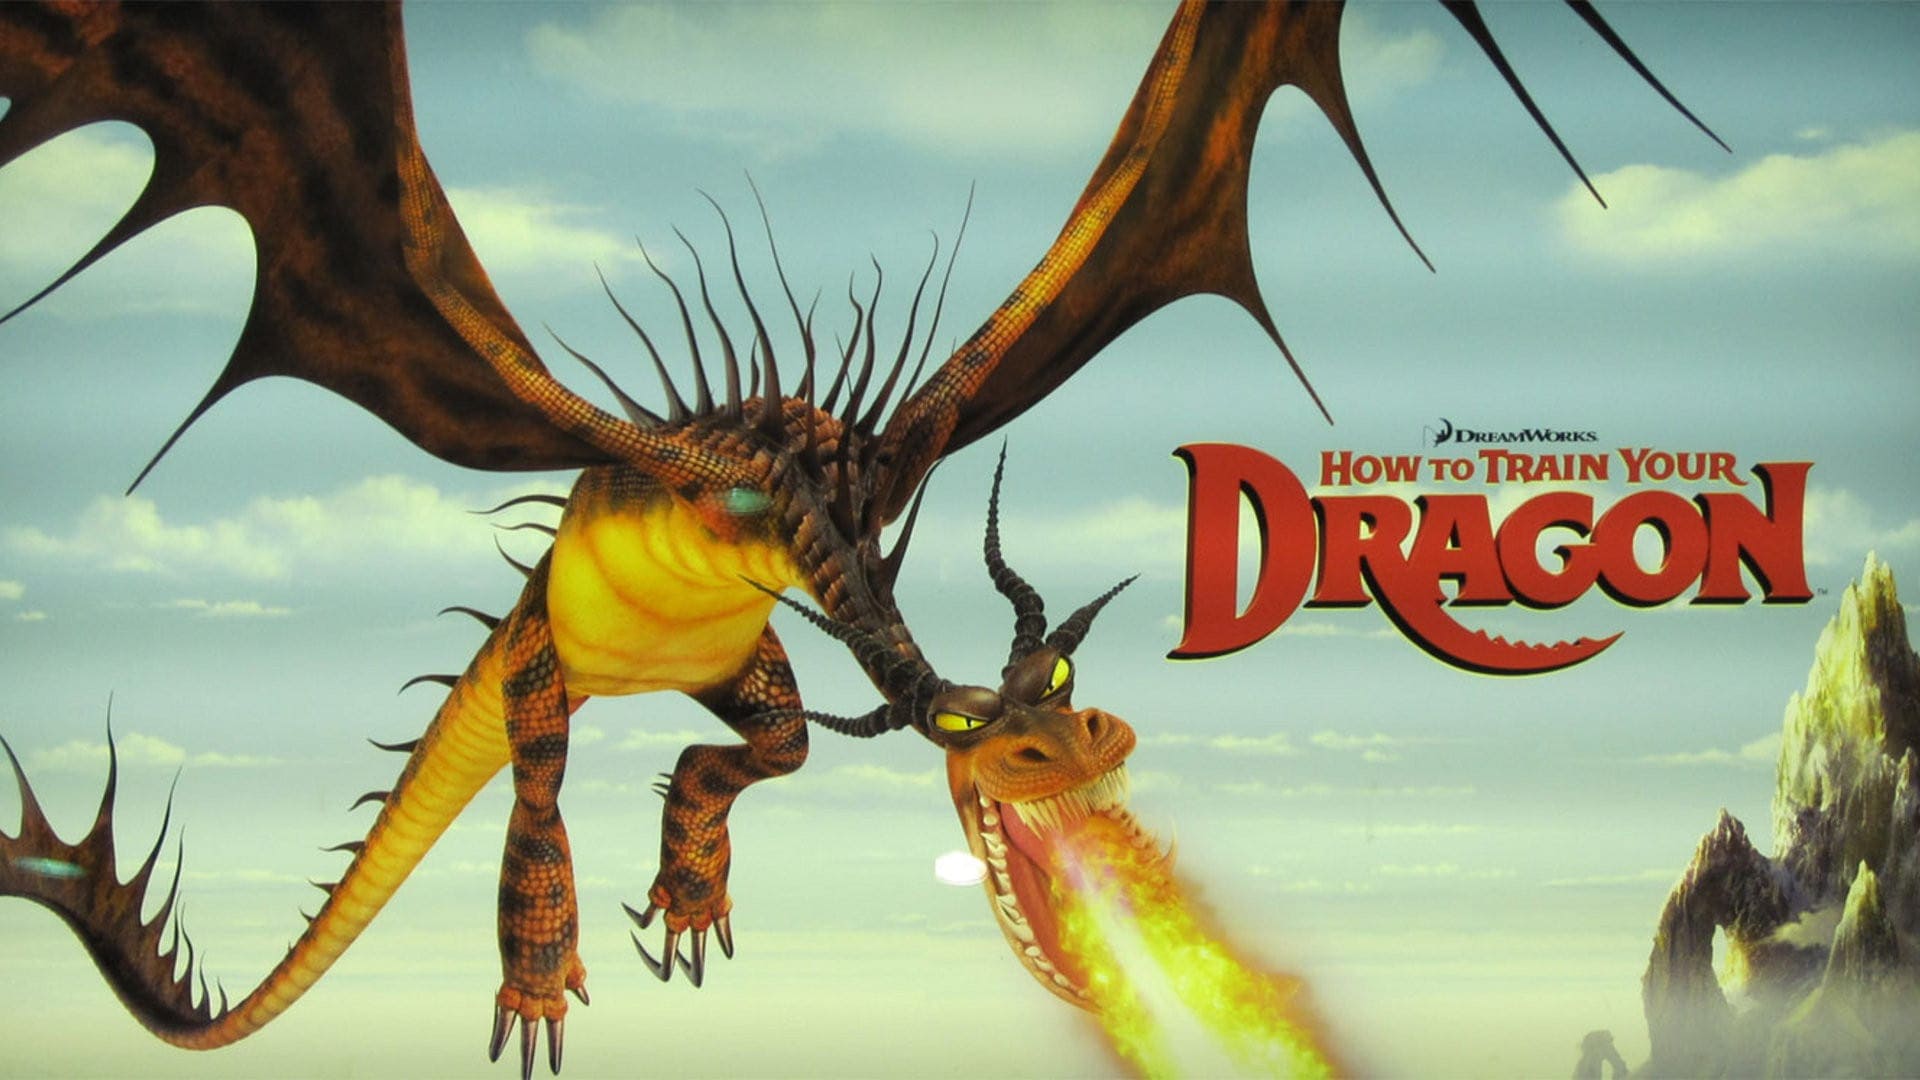 How to Train Your Dragon 4K 2010 big poster